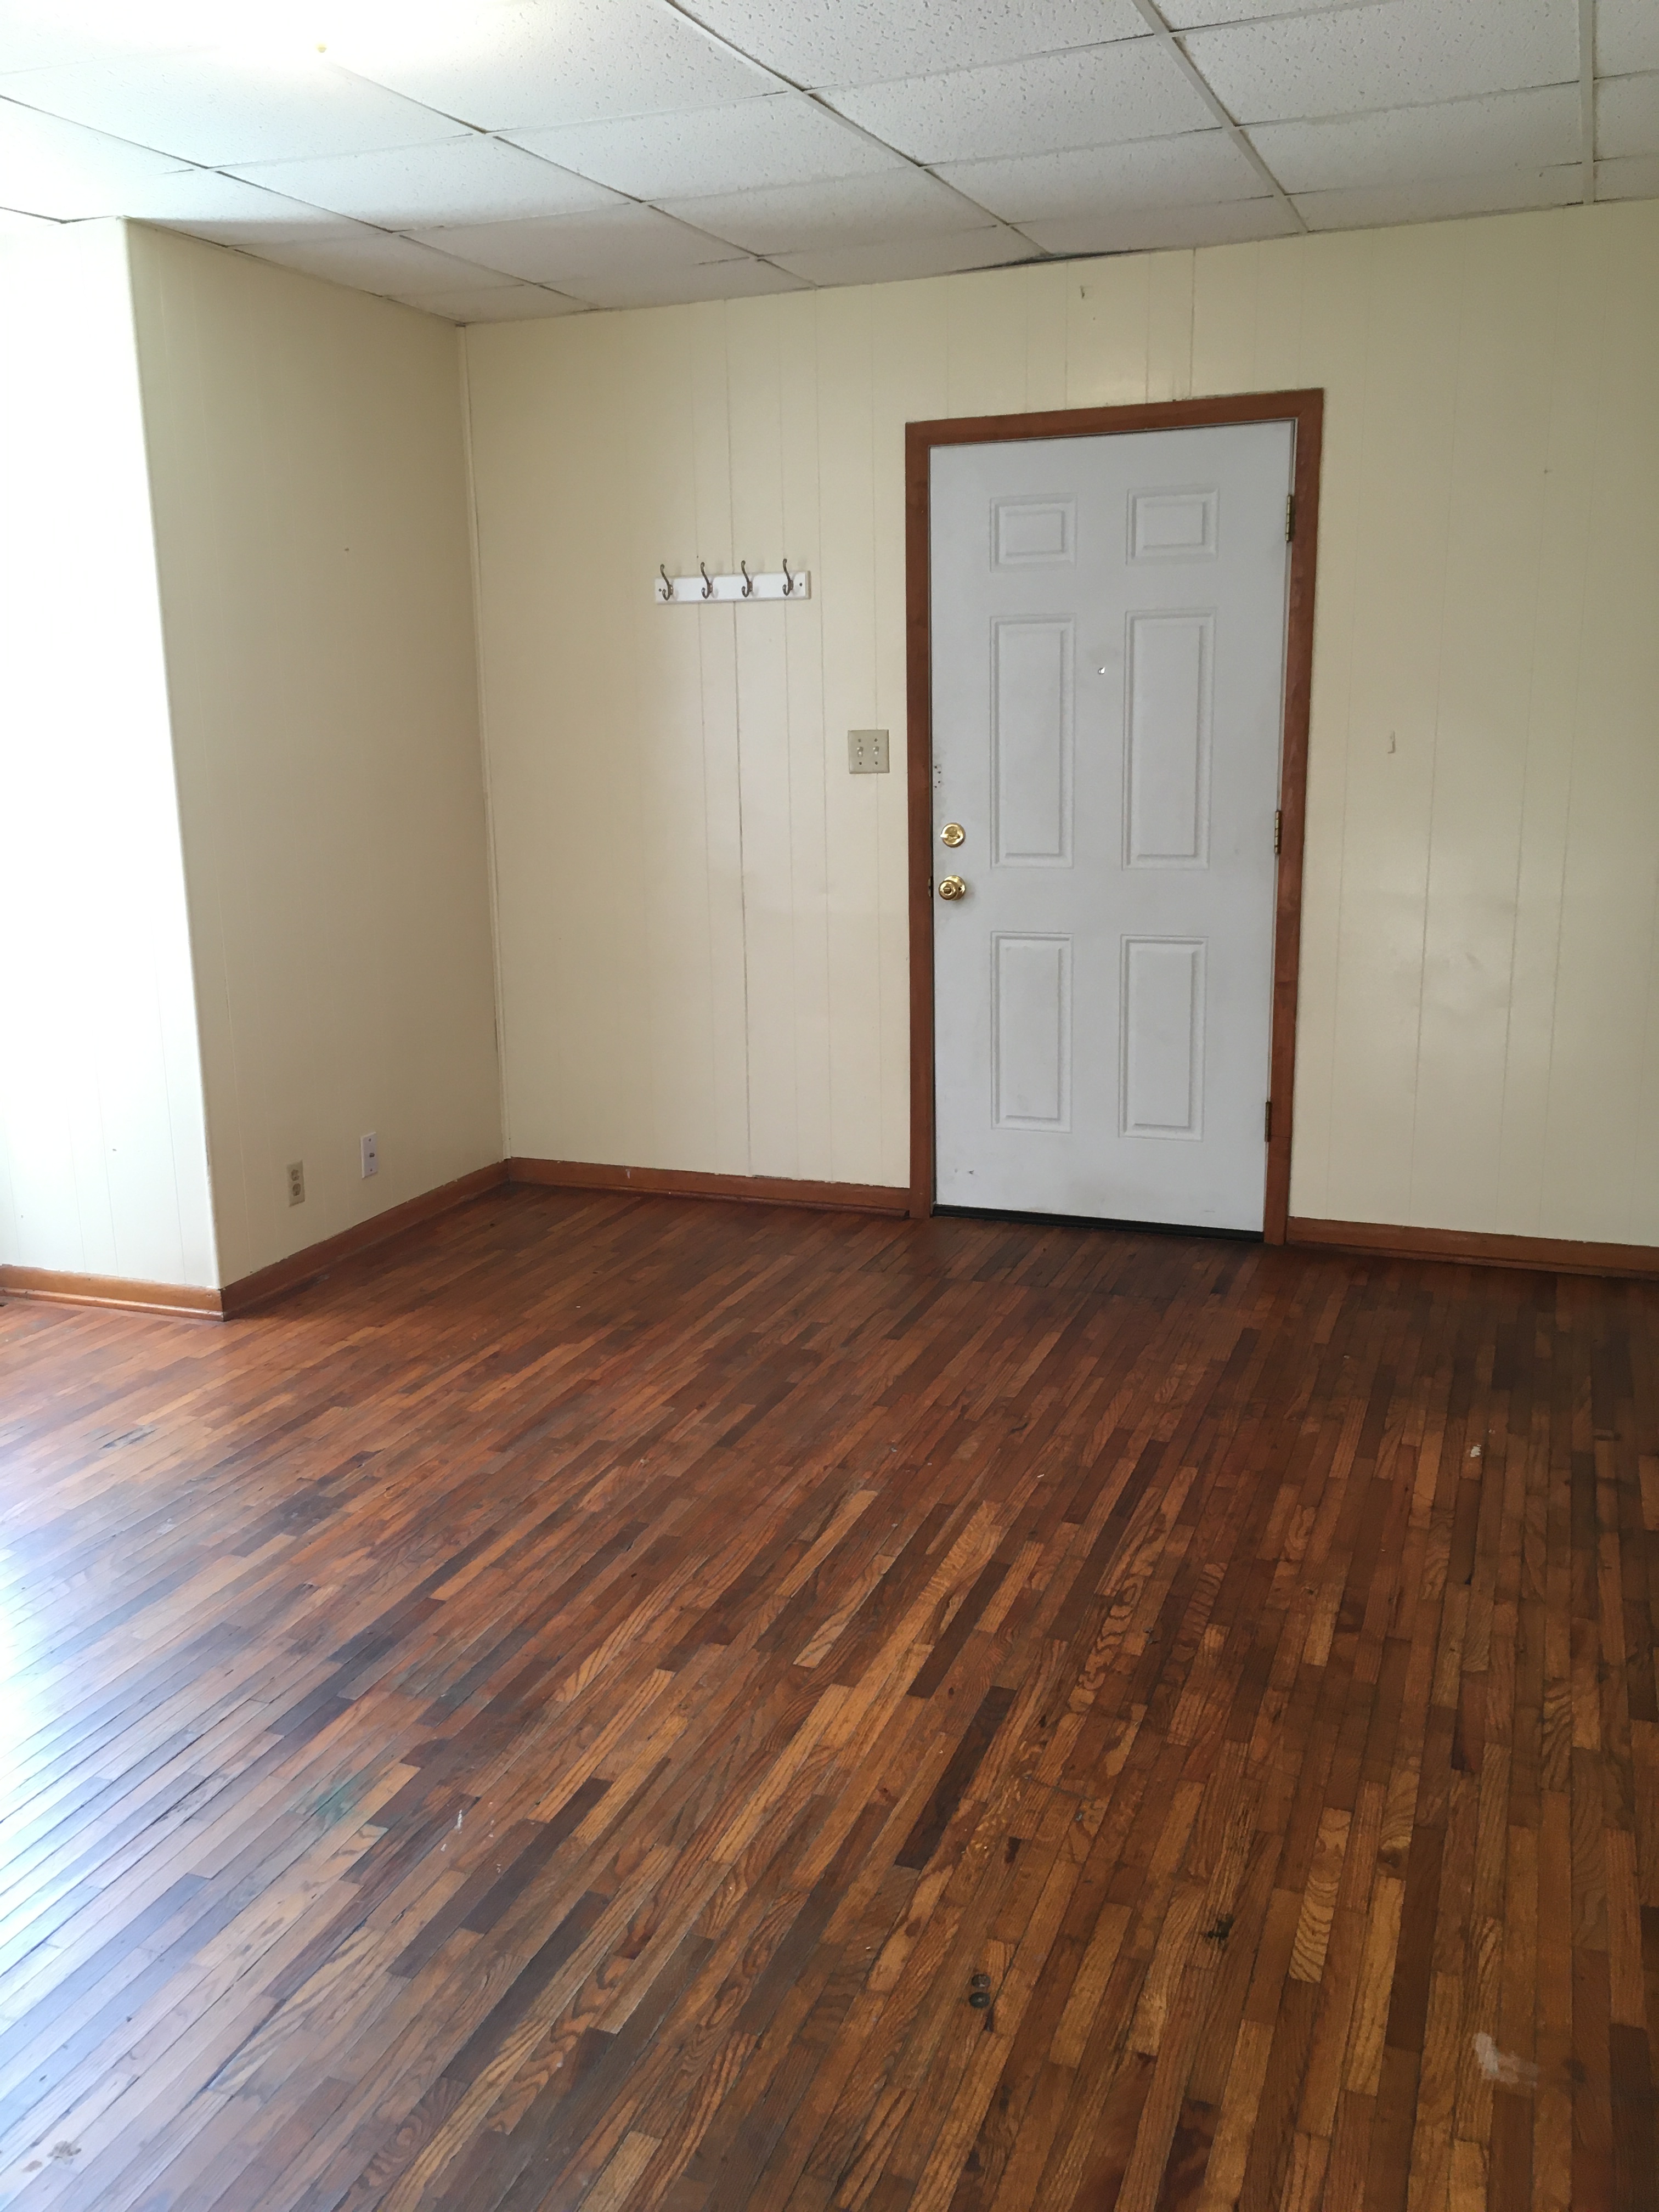 739 S. Crawford, Fort Scott, Bourbon County, Kansas, United States 66701, 1 Bedroom Bedrooms, ,1 BathroomBathrooms,Apartment,For Rent, S. Crawford,1,1023